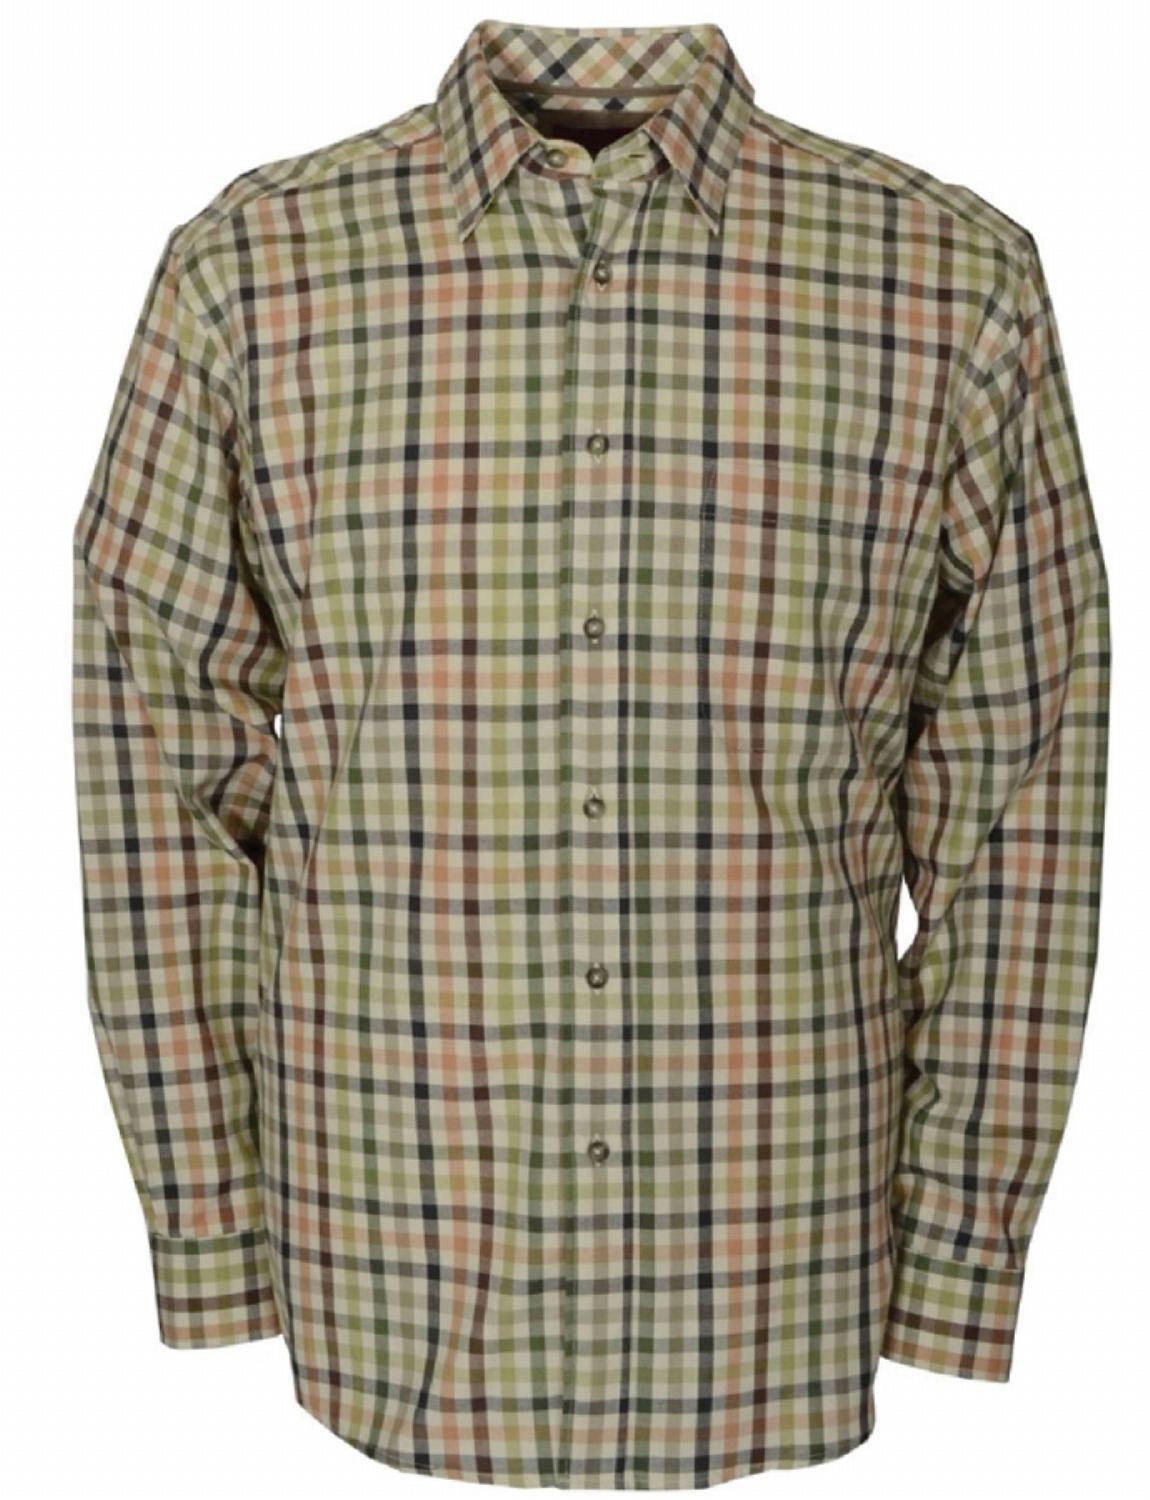 Brushed Check Cotton Shirt By Bar Harbour - Menswear Shirts & Tops | Chums